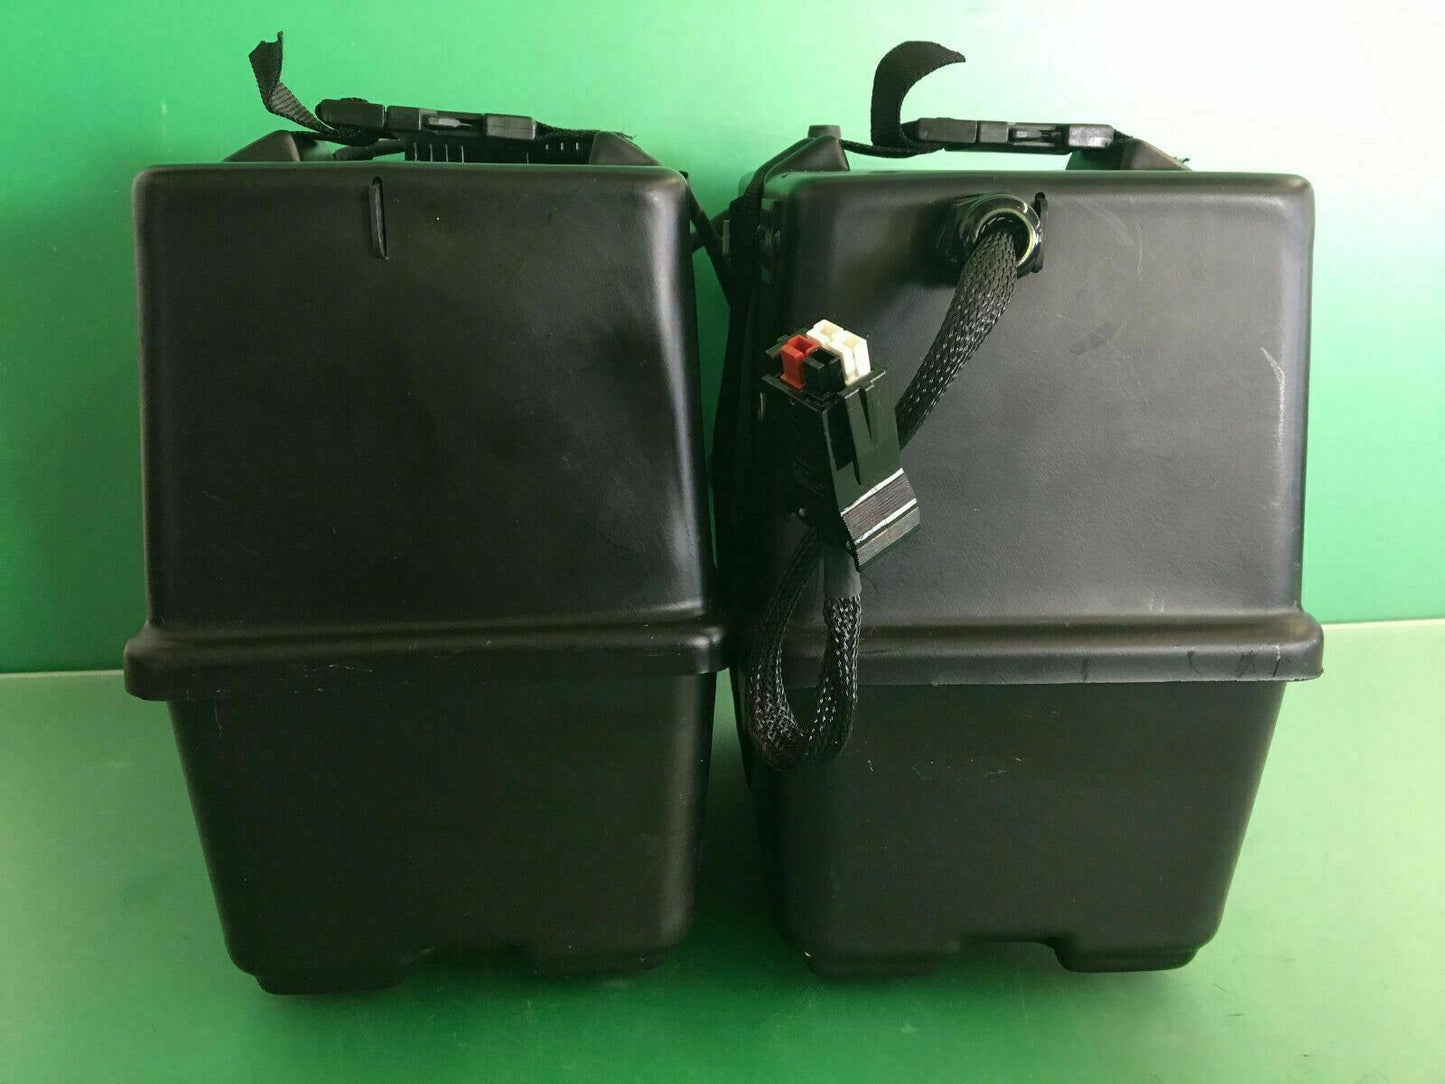 Pride Battery Boxes w/ Wiring Harness for Jazzy 1115 Power Wheelchair #D413